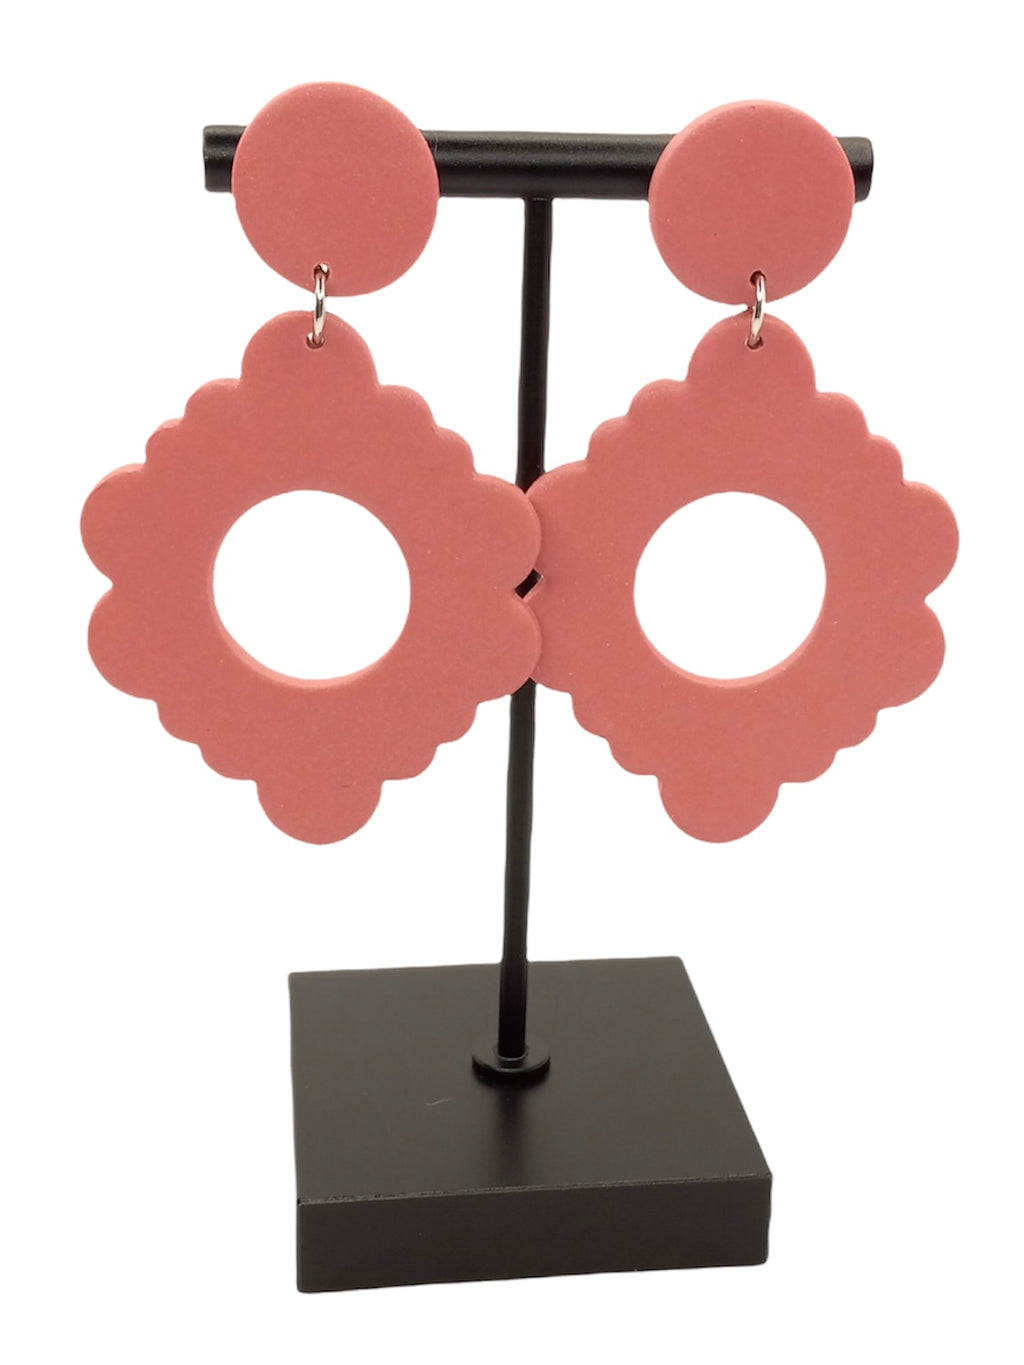 The Clarissa in Pink Handmade Earrings